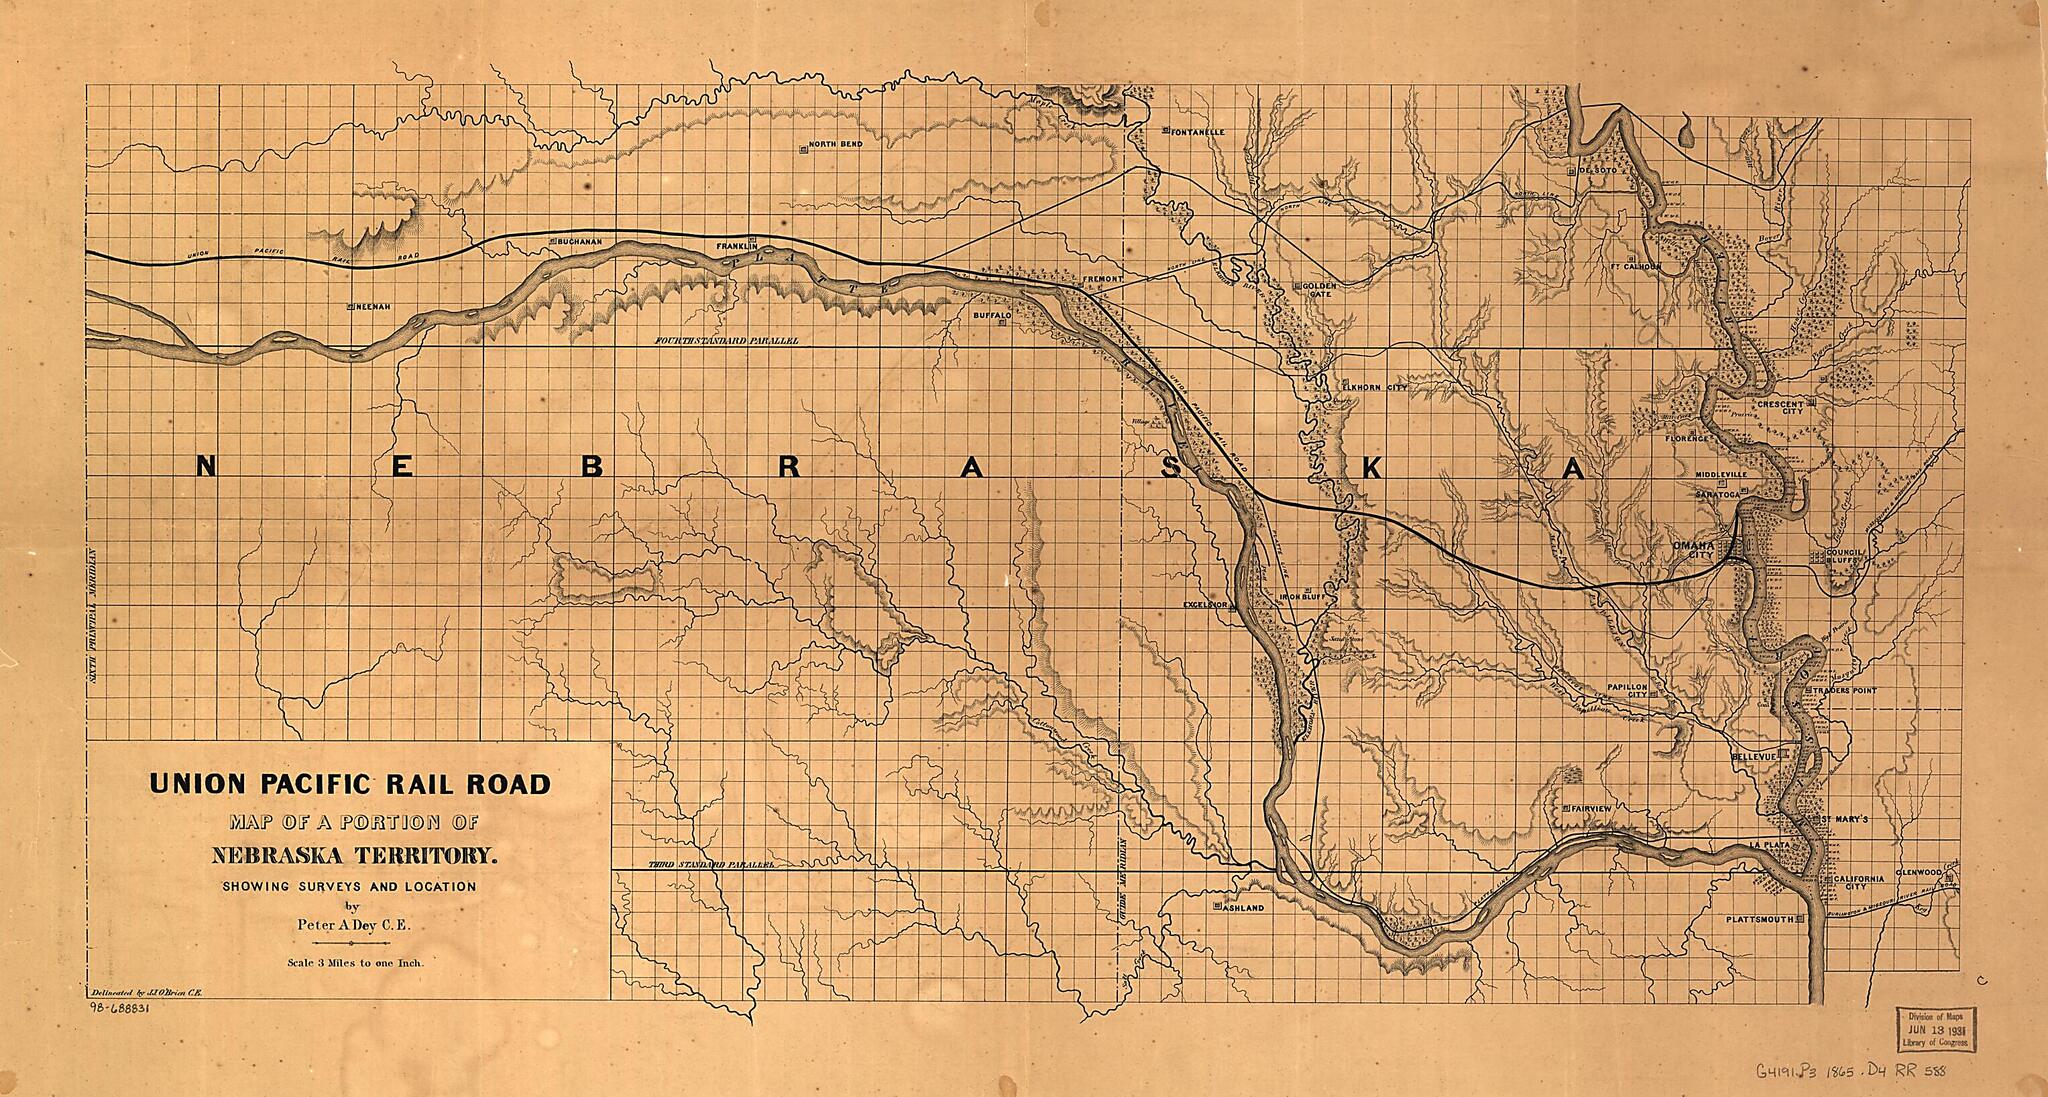 This old map of Union Pacific Rail Road, Map of a Portion of Nebraska Territory, Showing Surveys and Location of Lines by Peter A. Dey, C.E from 1865 was created by Peter Anthony Dey,  Union Pacific Railroad Company in 1865